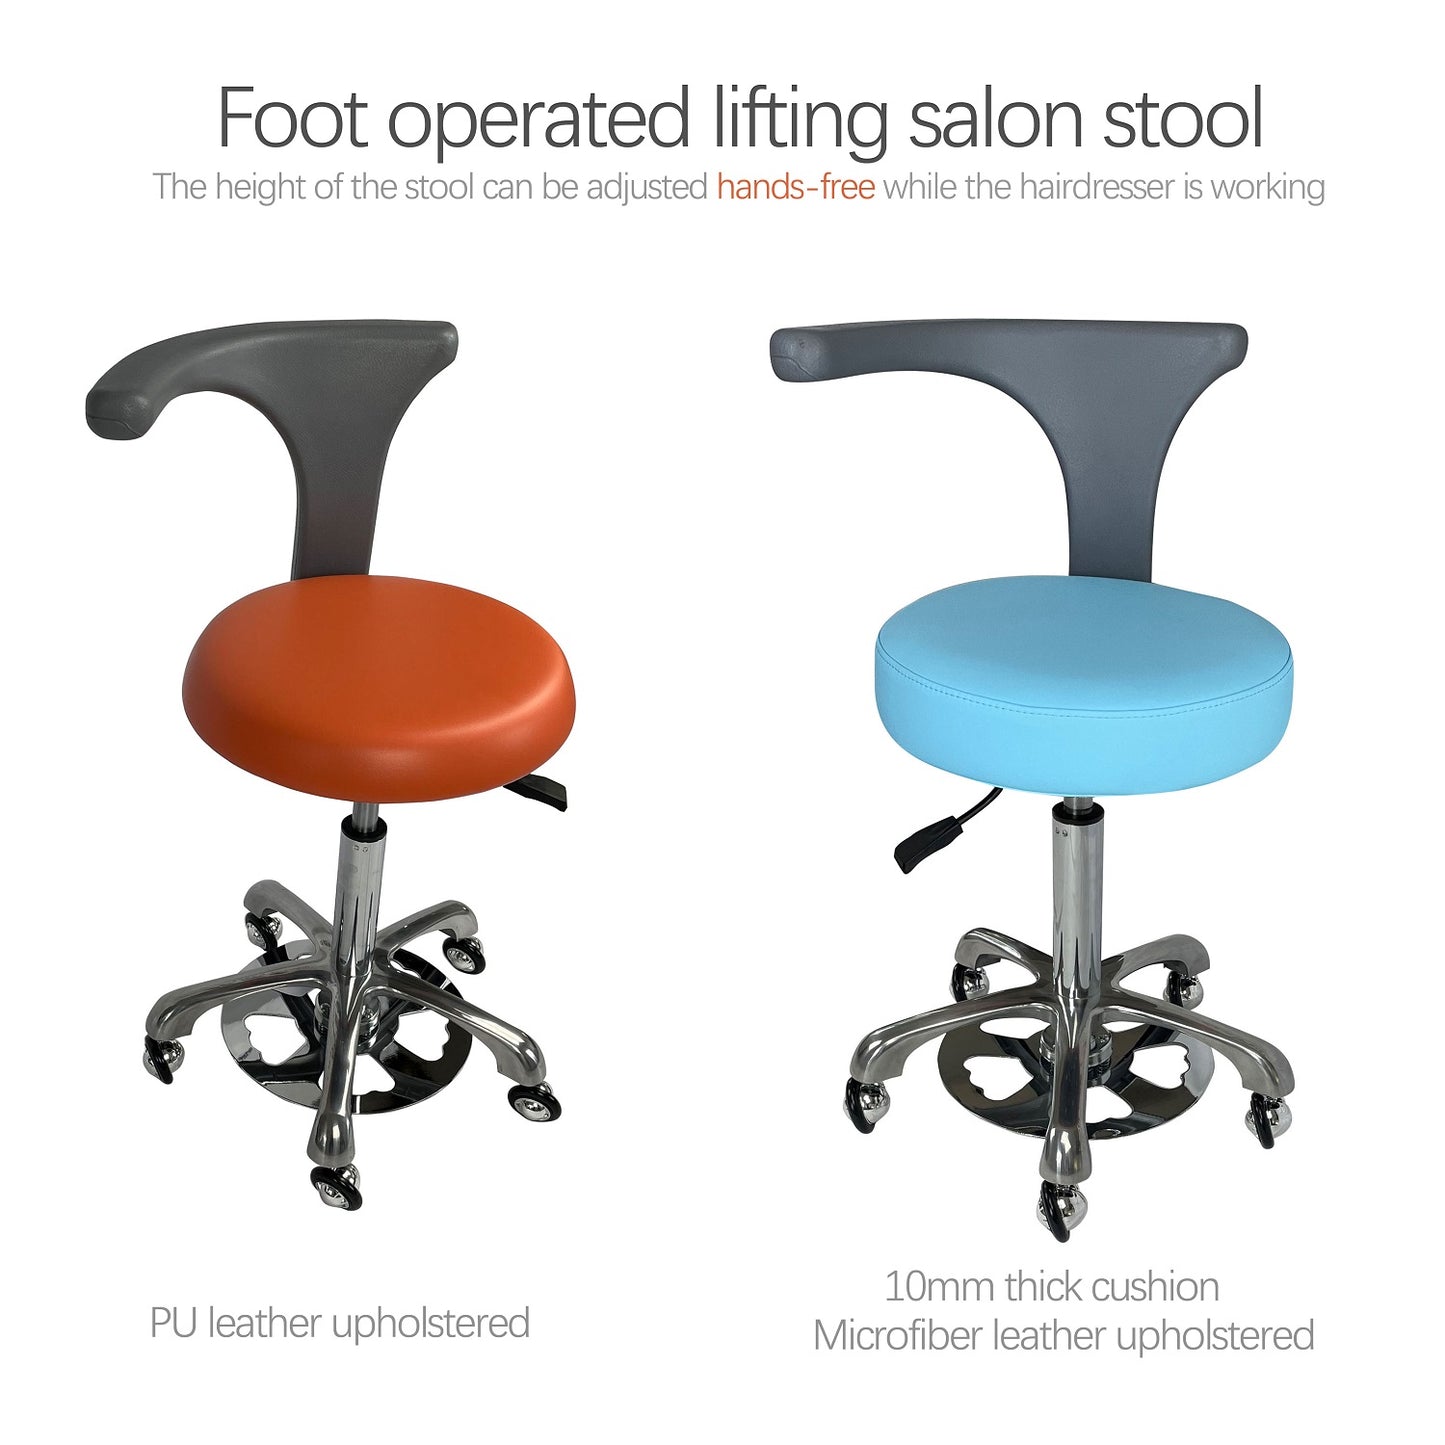 S1208 Foot operated control pedal stool for hairdressing salon, lab, surgeon dental clinic